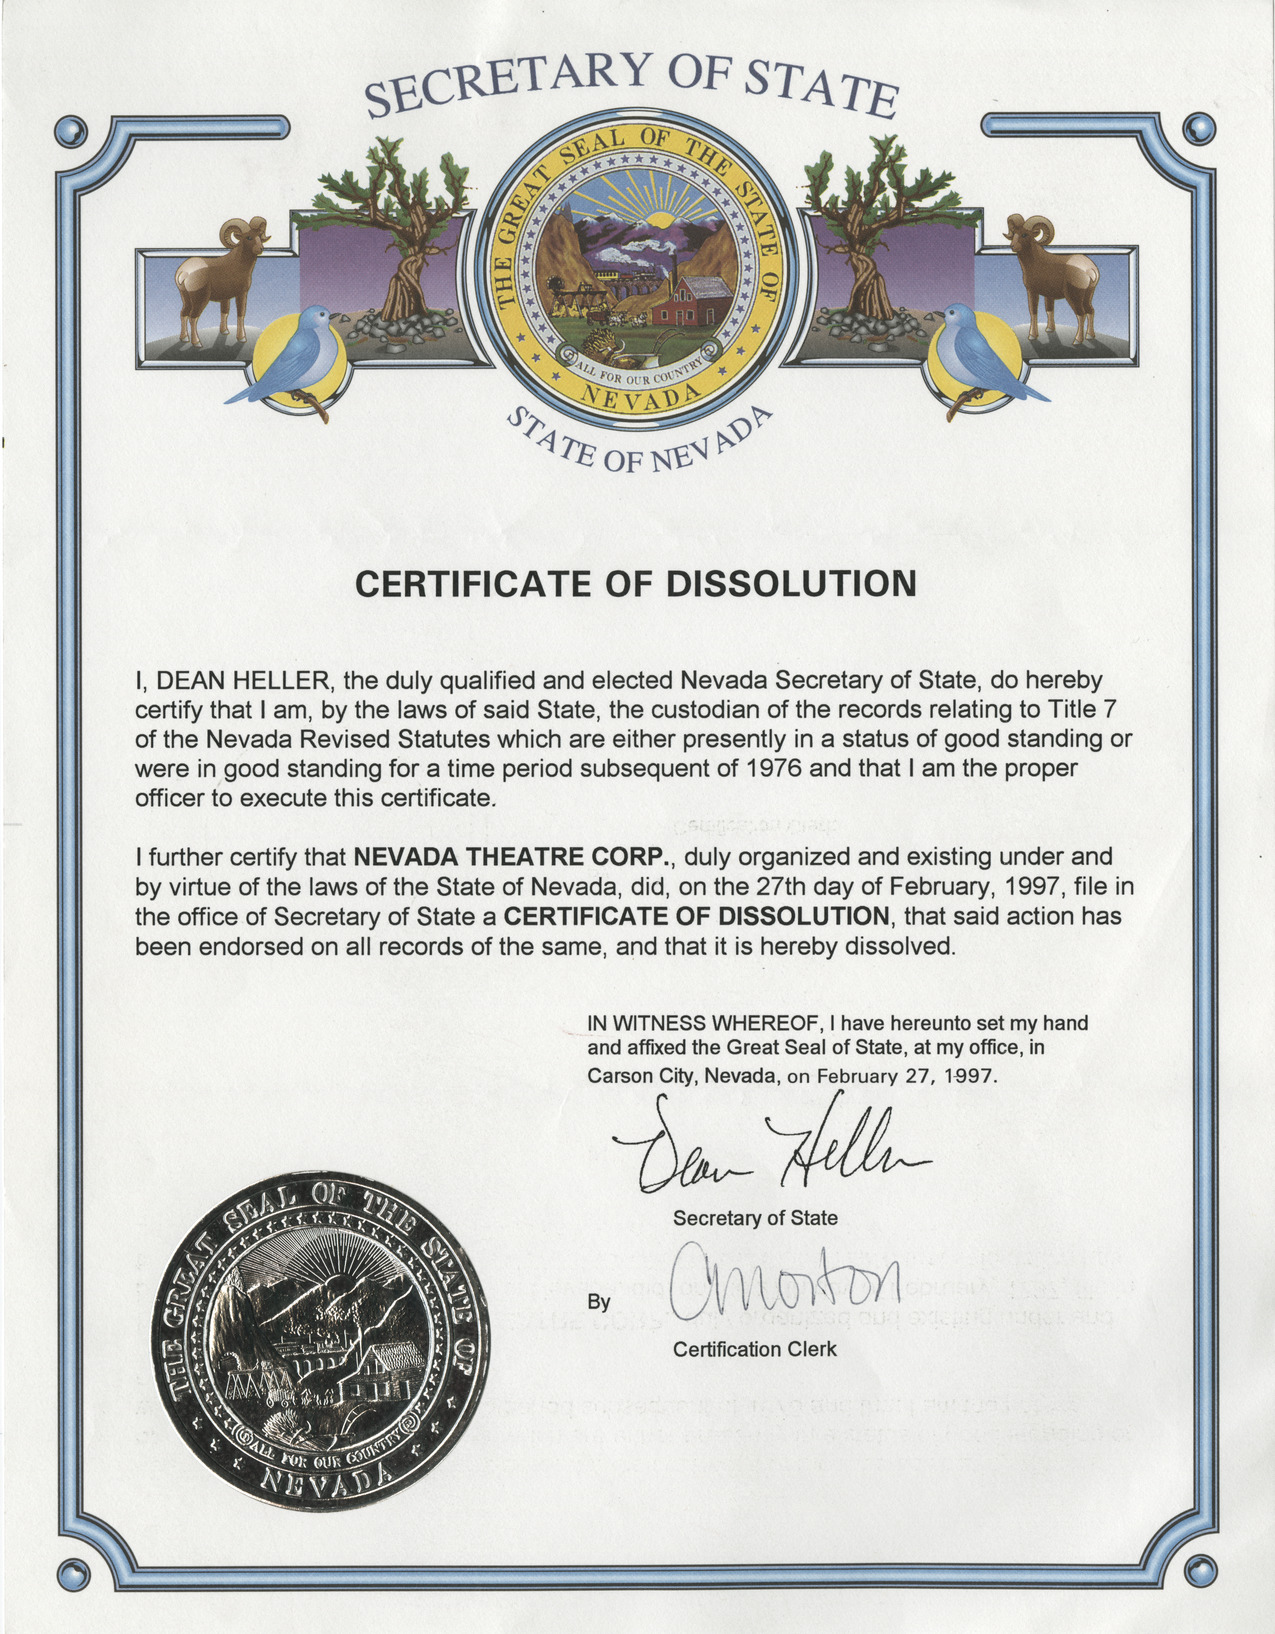 Certificate of Dissolution for the Nevada Theater Corporation, February 27, 1997